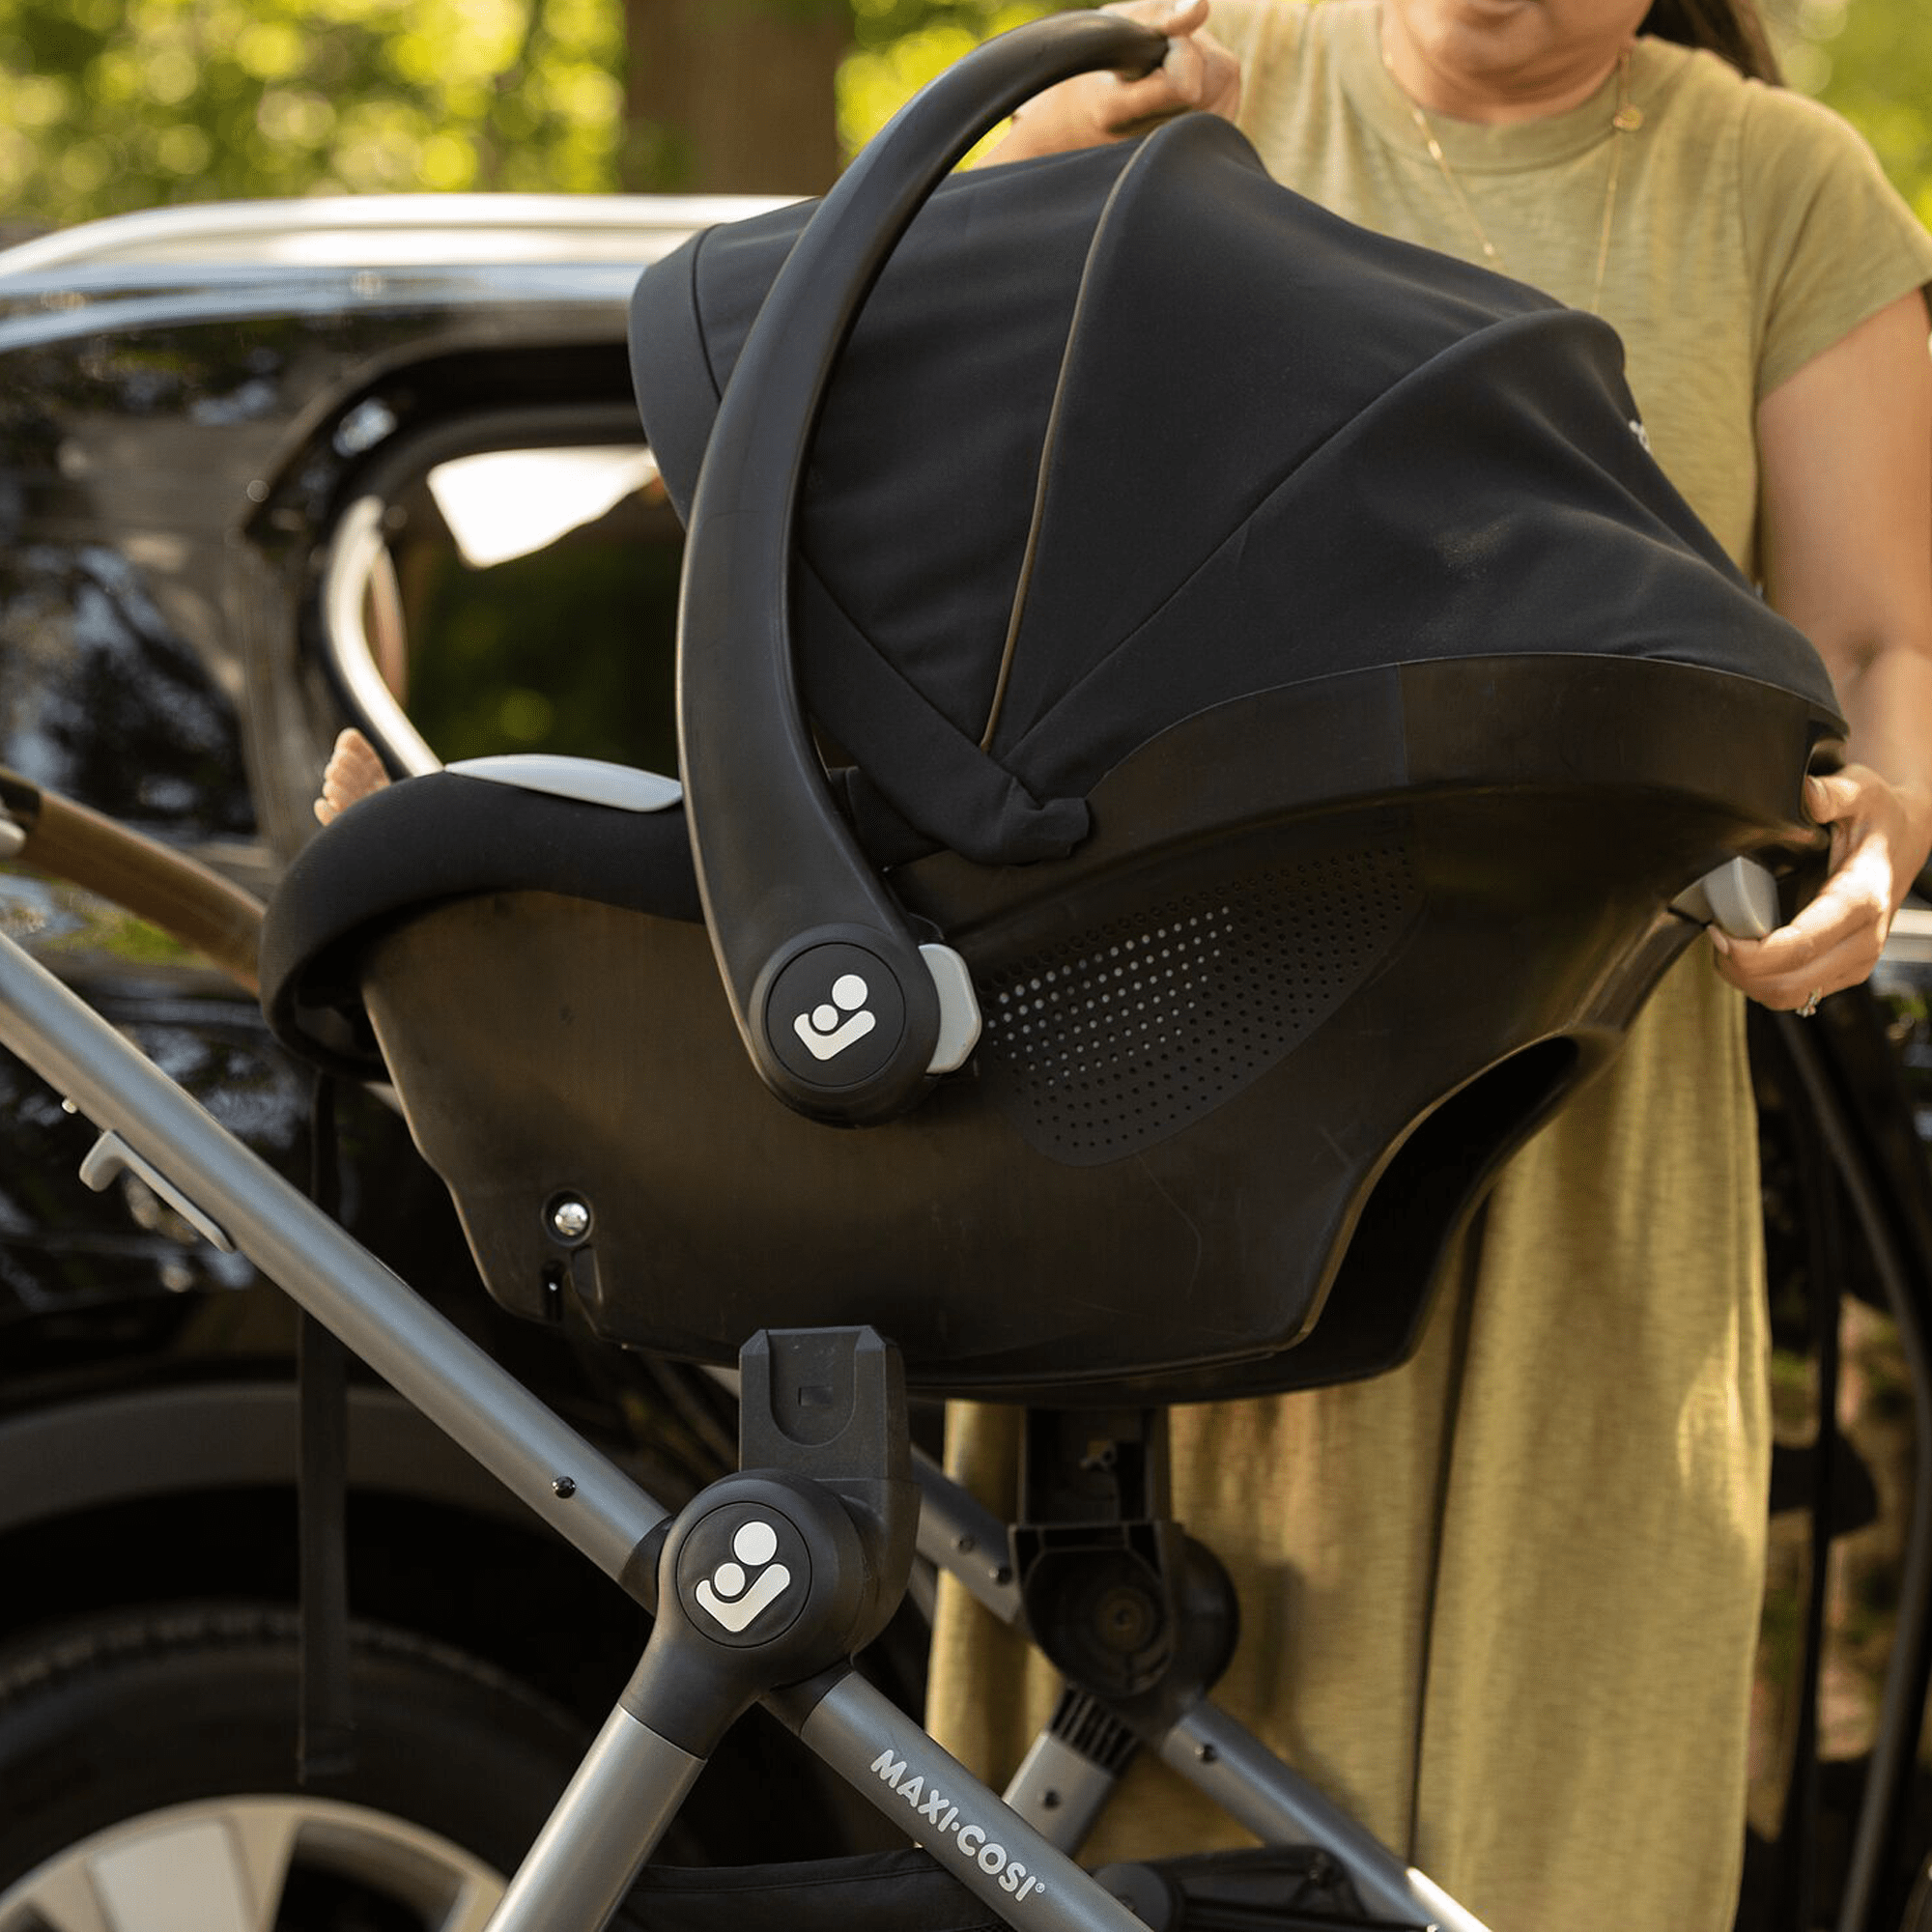 Maxi-cosi Mico Luxe Infant Car Seat - Navy Glow : Target